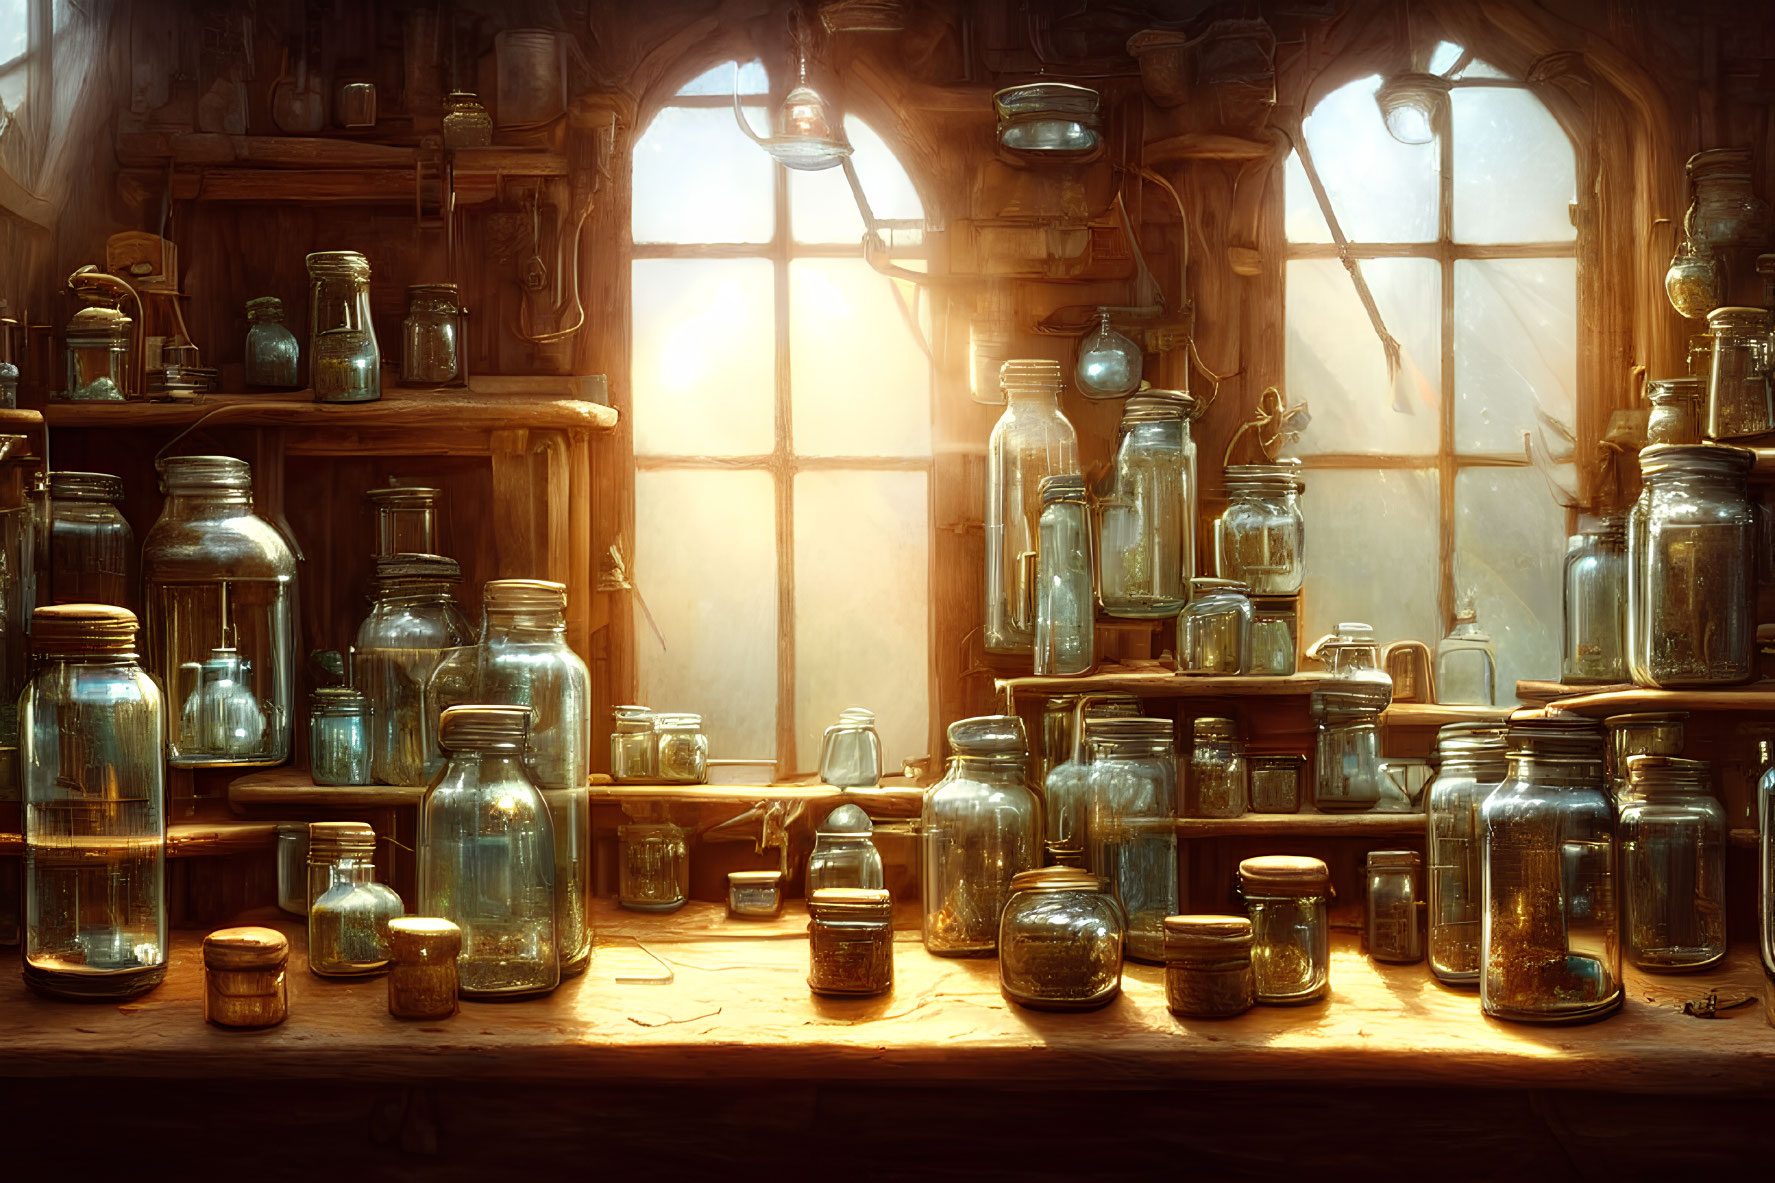 Sunlight on wooden table with glass jars and bottles